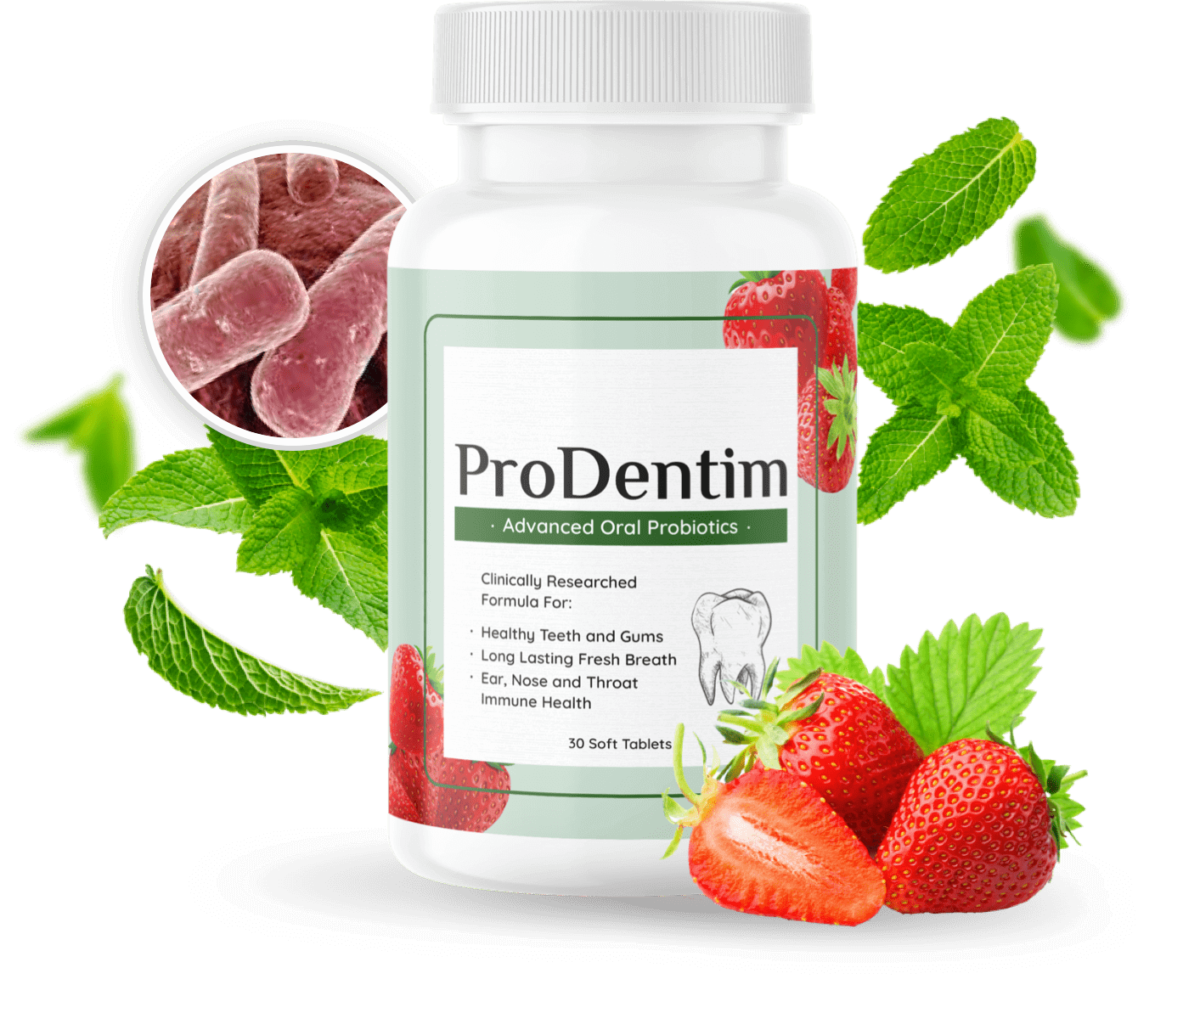 Does ProDentim Work? How Can I Take It? Is it worth it? Where to Buy?